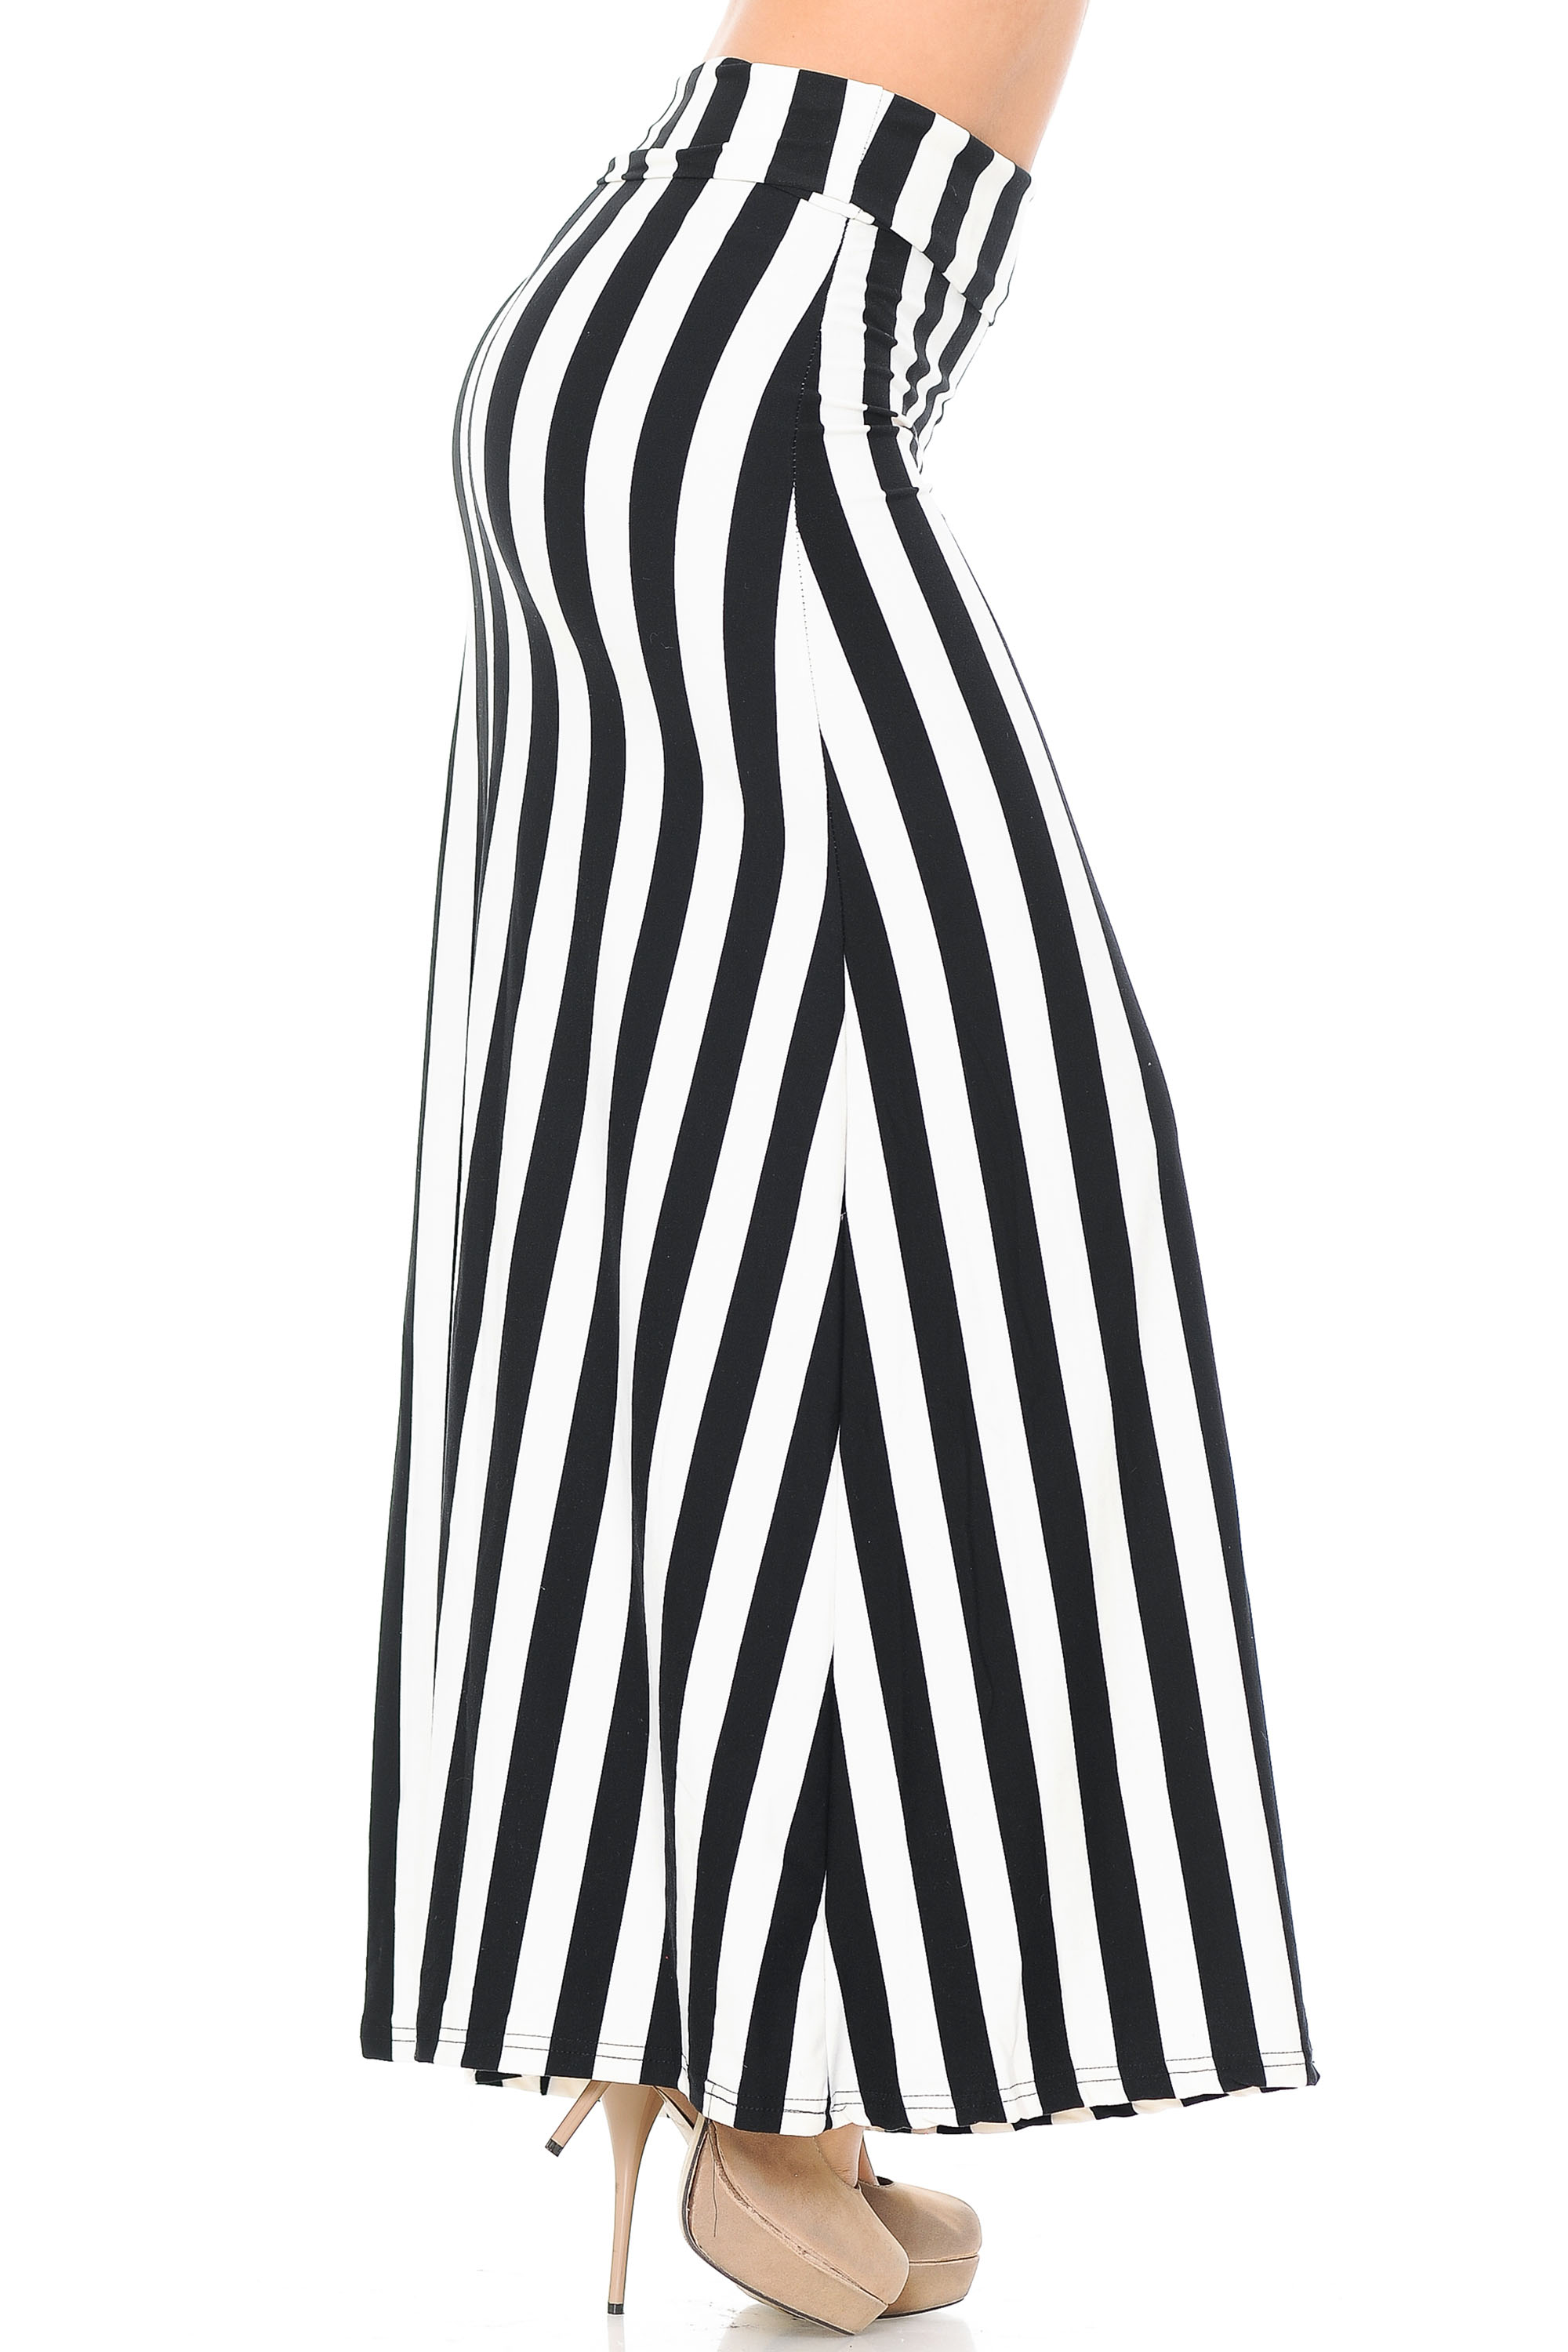 Wholesale Buttery Smooth Black and White Wide Stripe Maxi Skirt